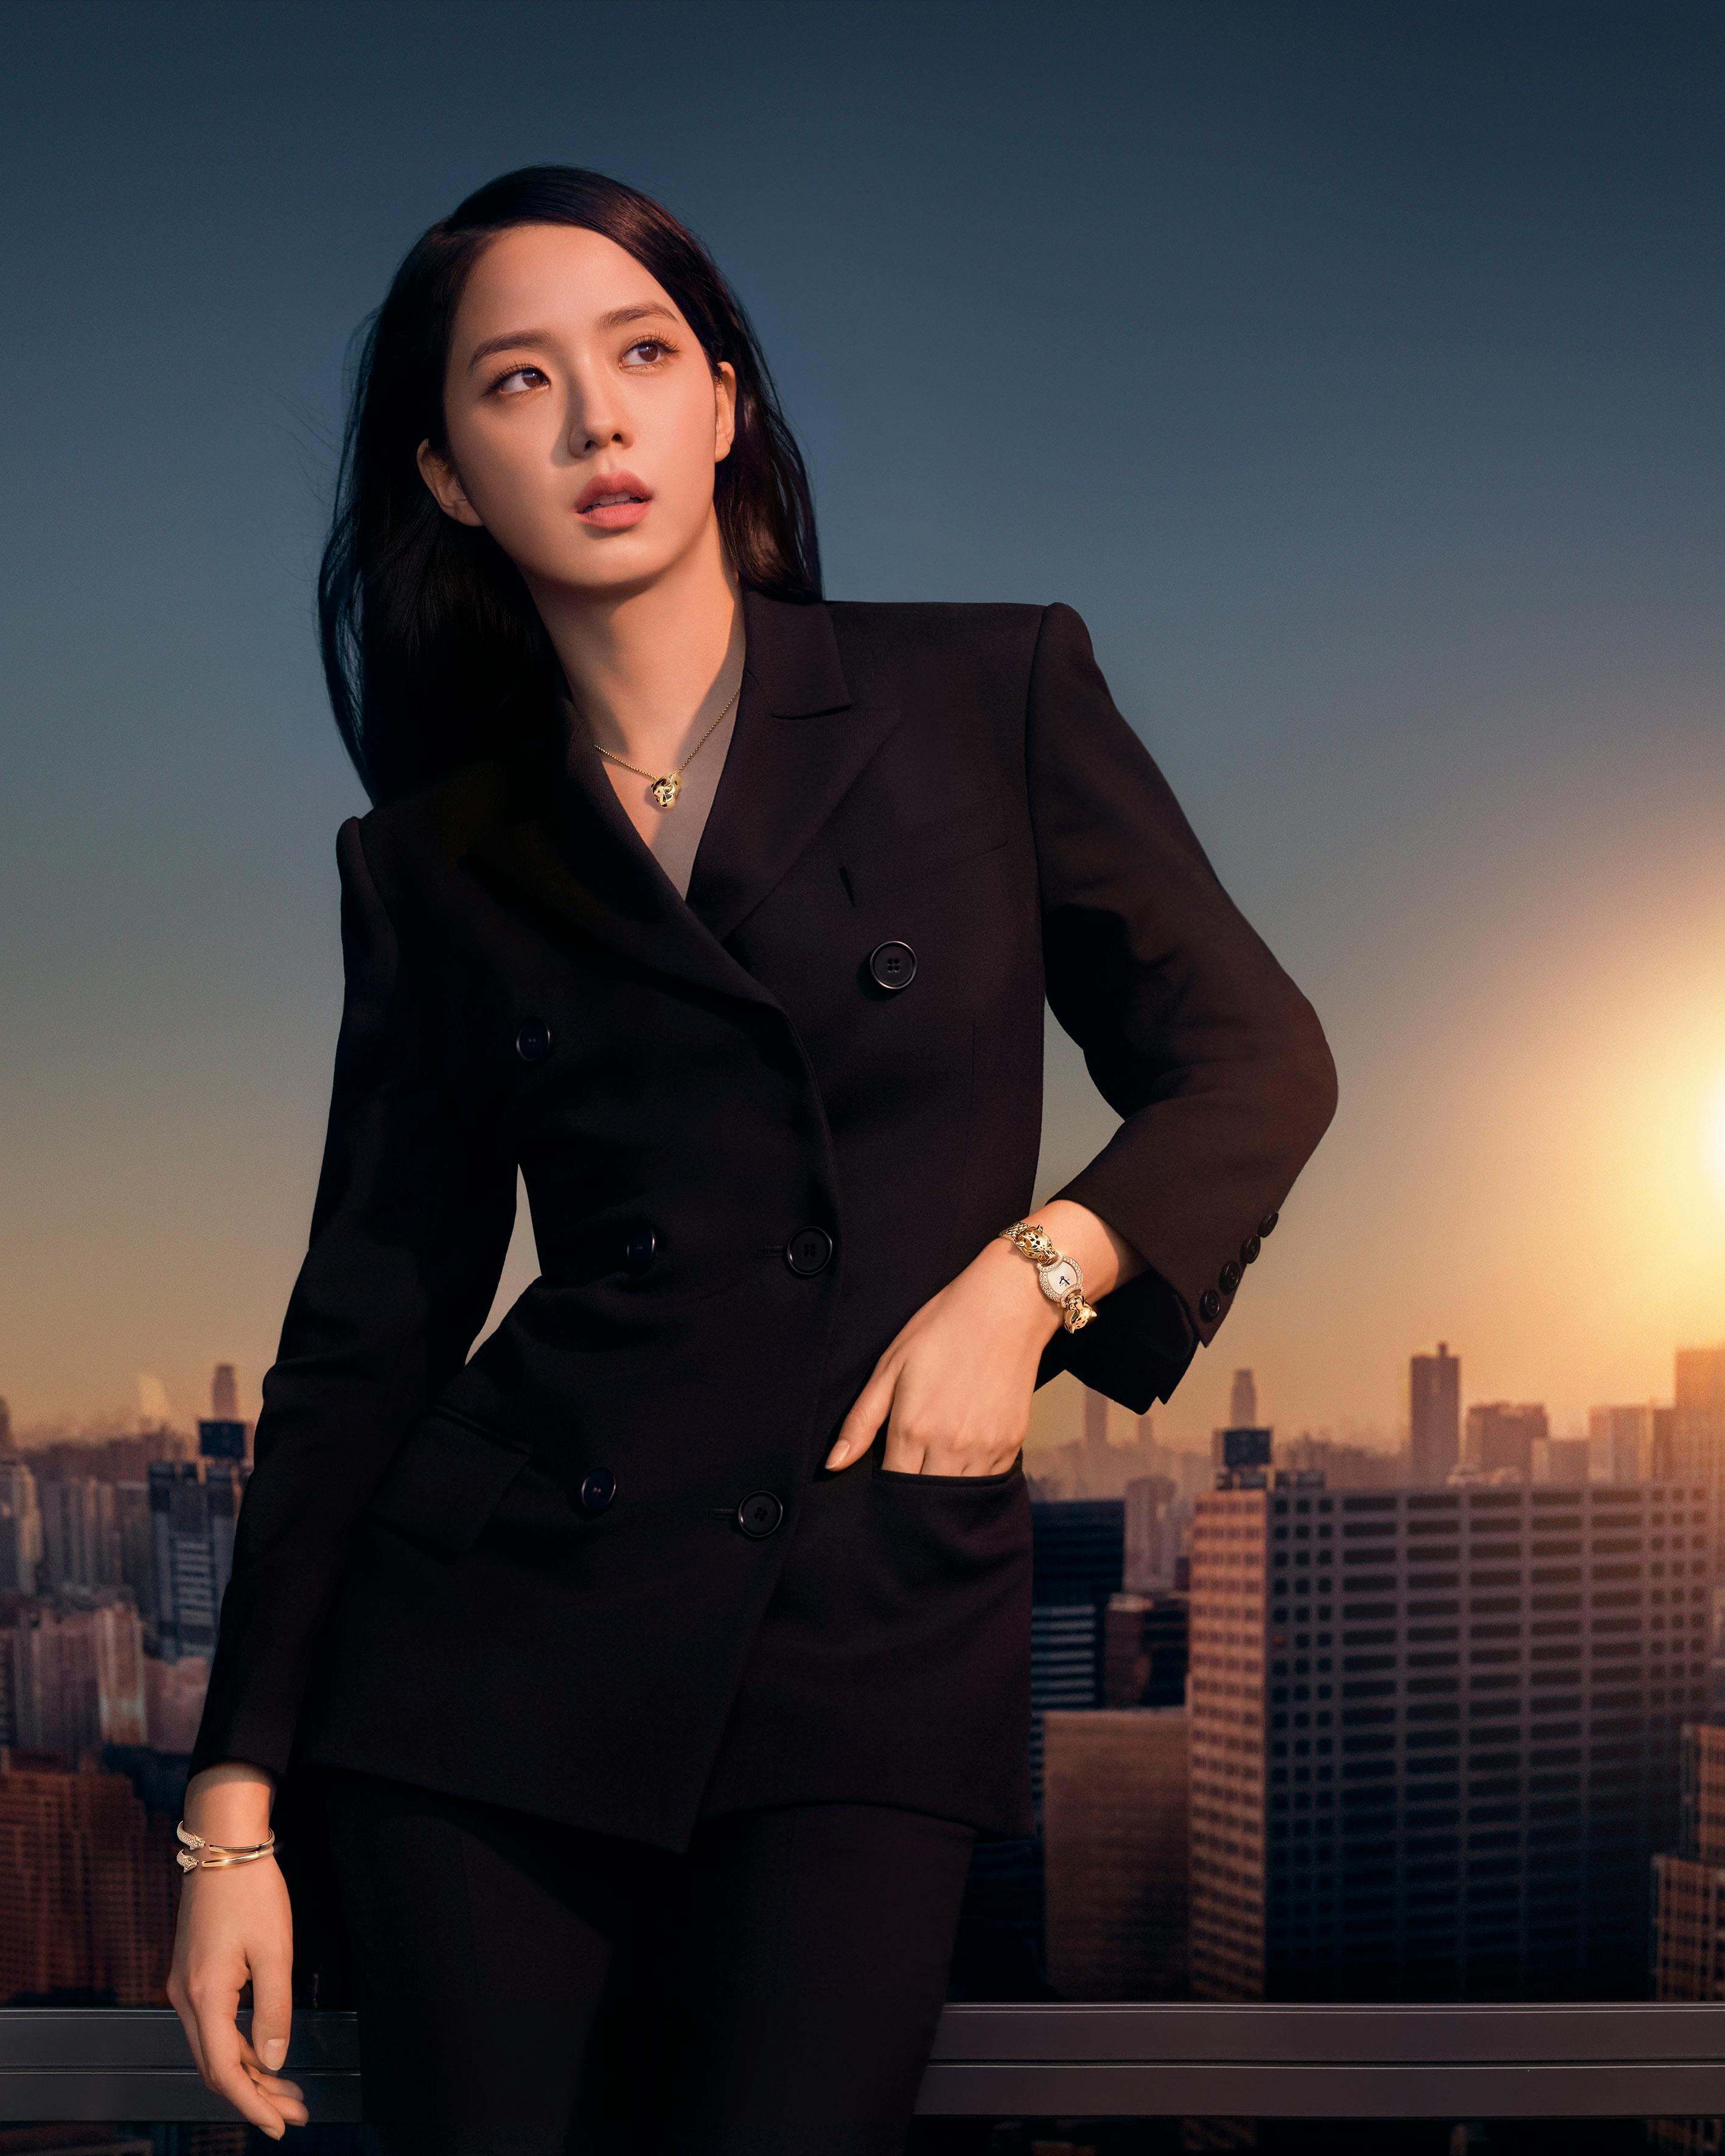 Jisoo is the New Face of Cartier